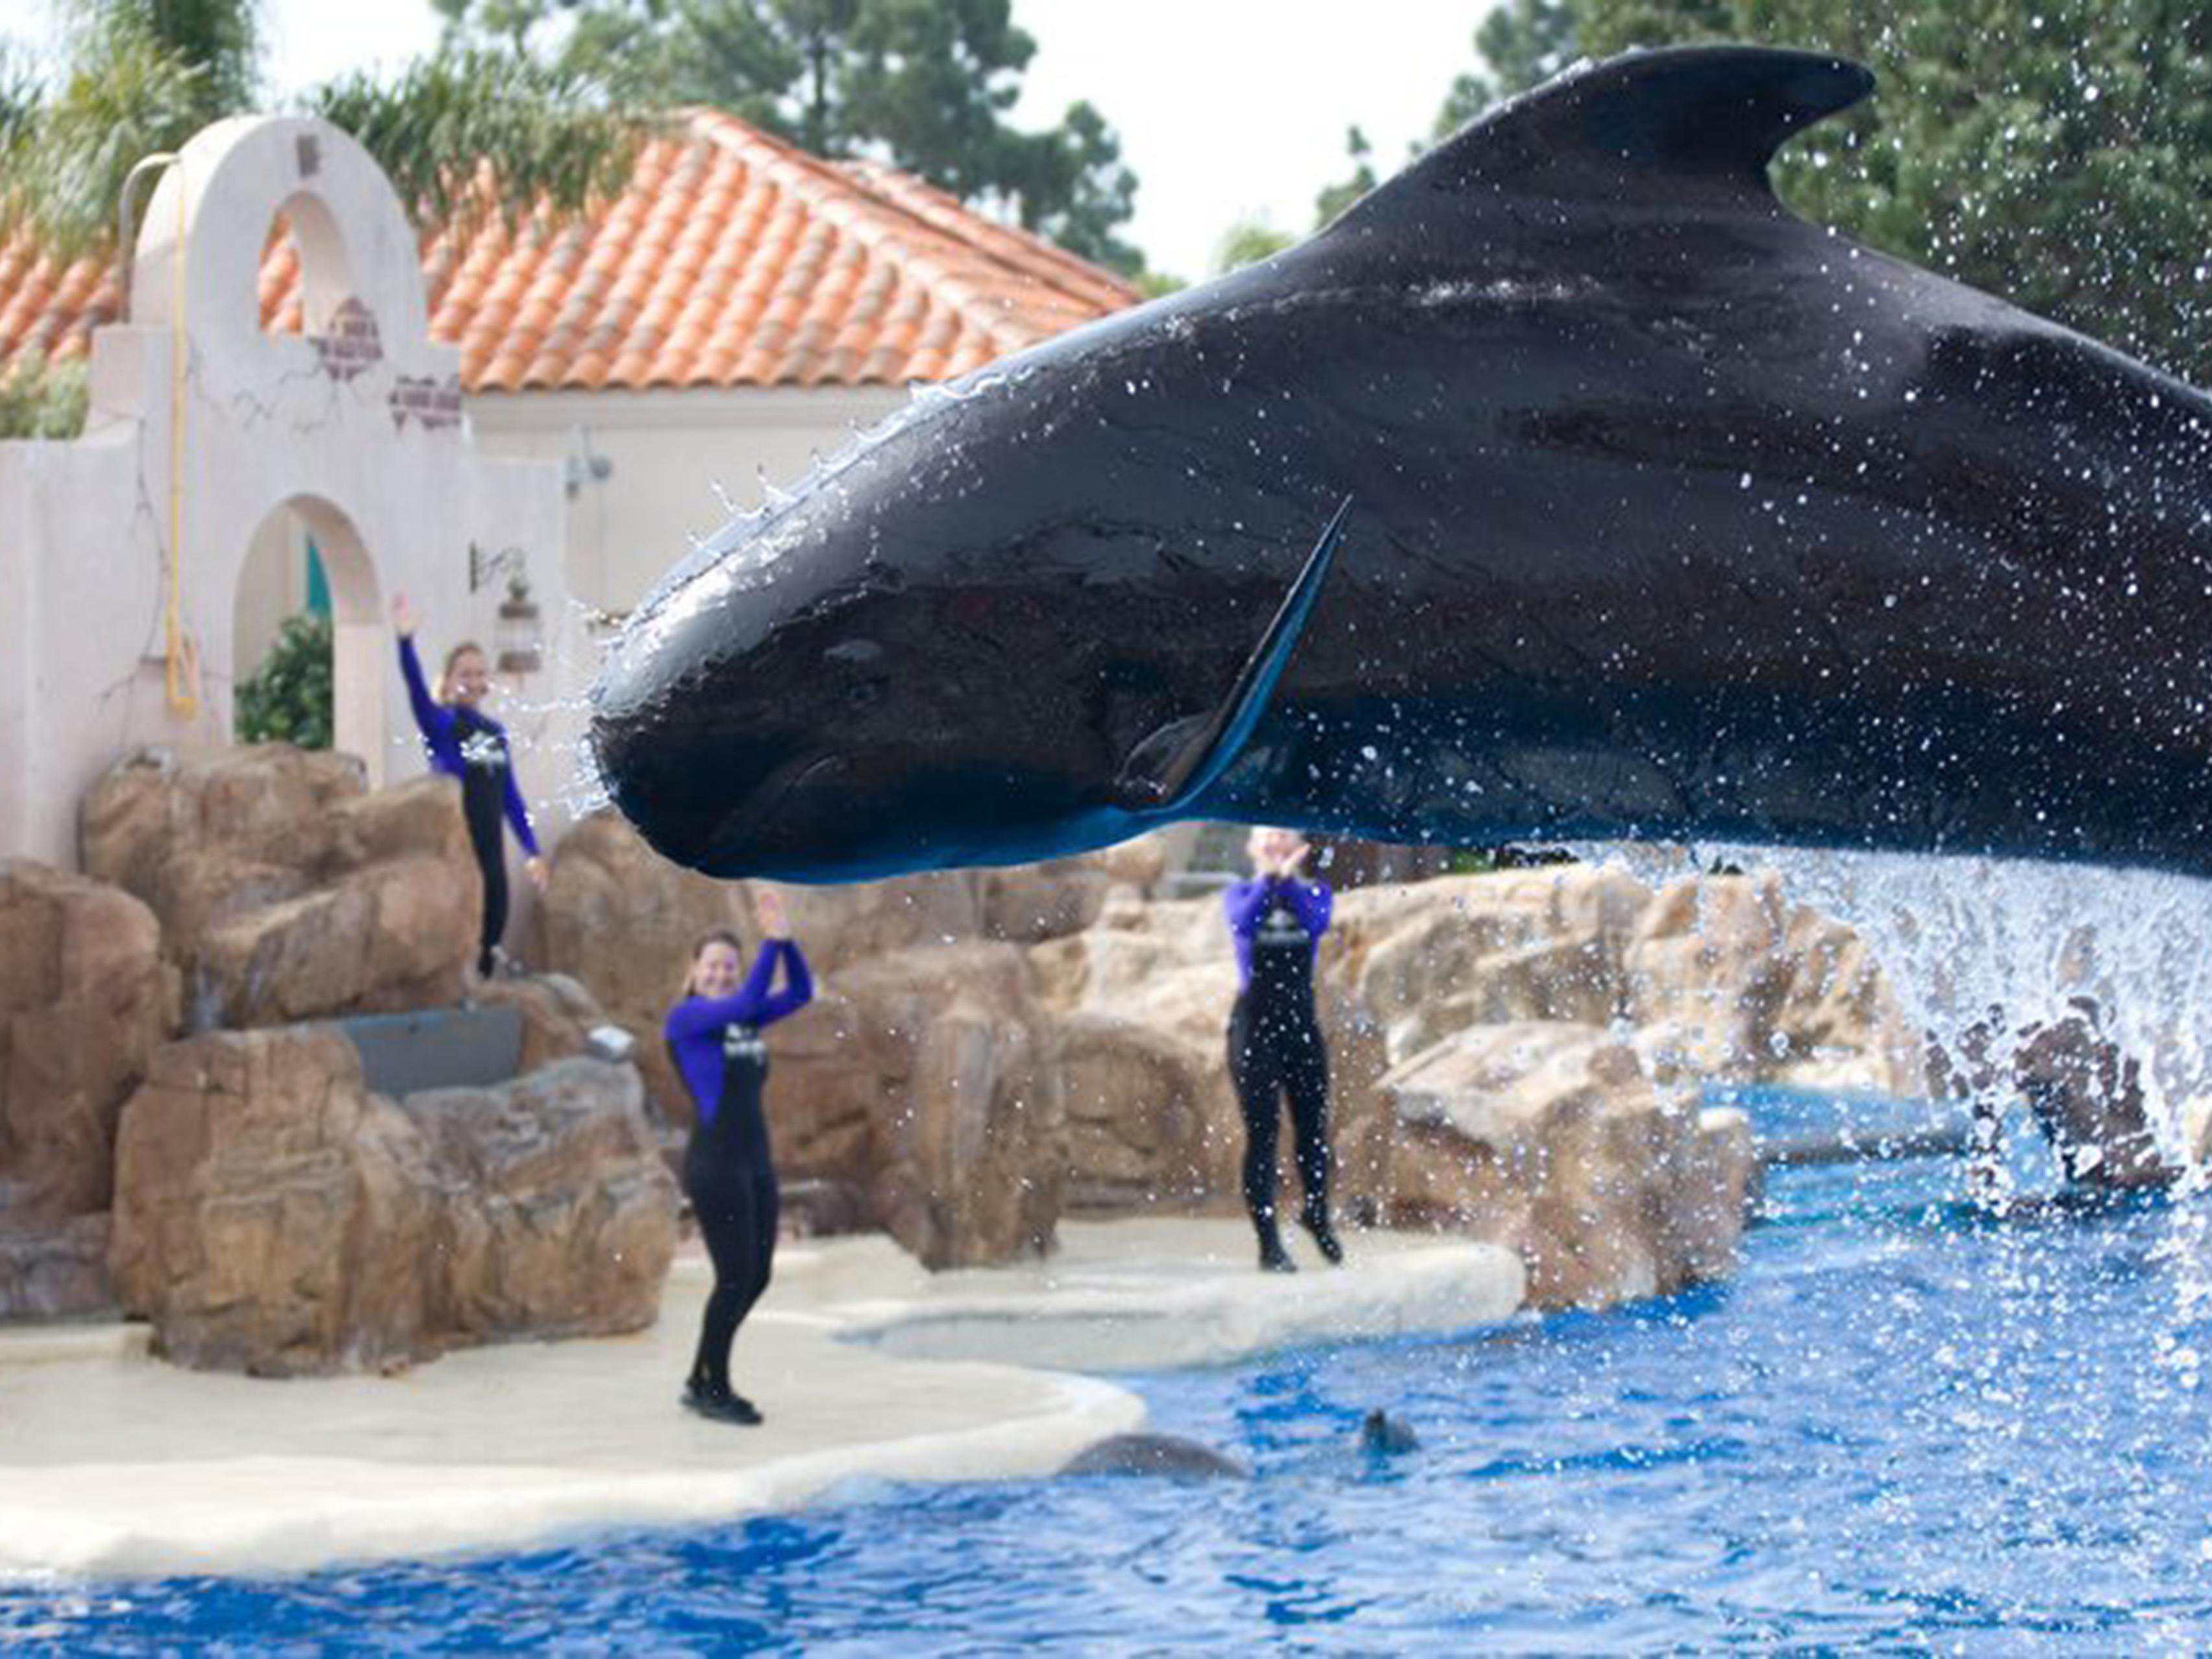 Have a whale of a good time at SeaWorld San Diego.